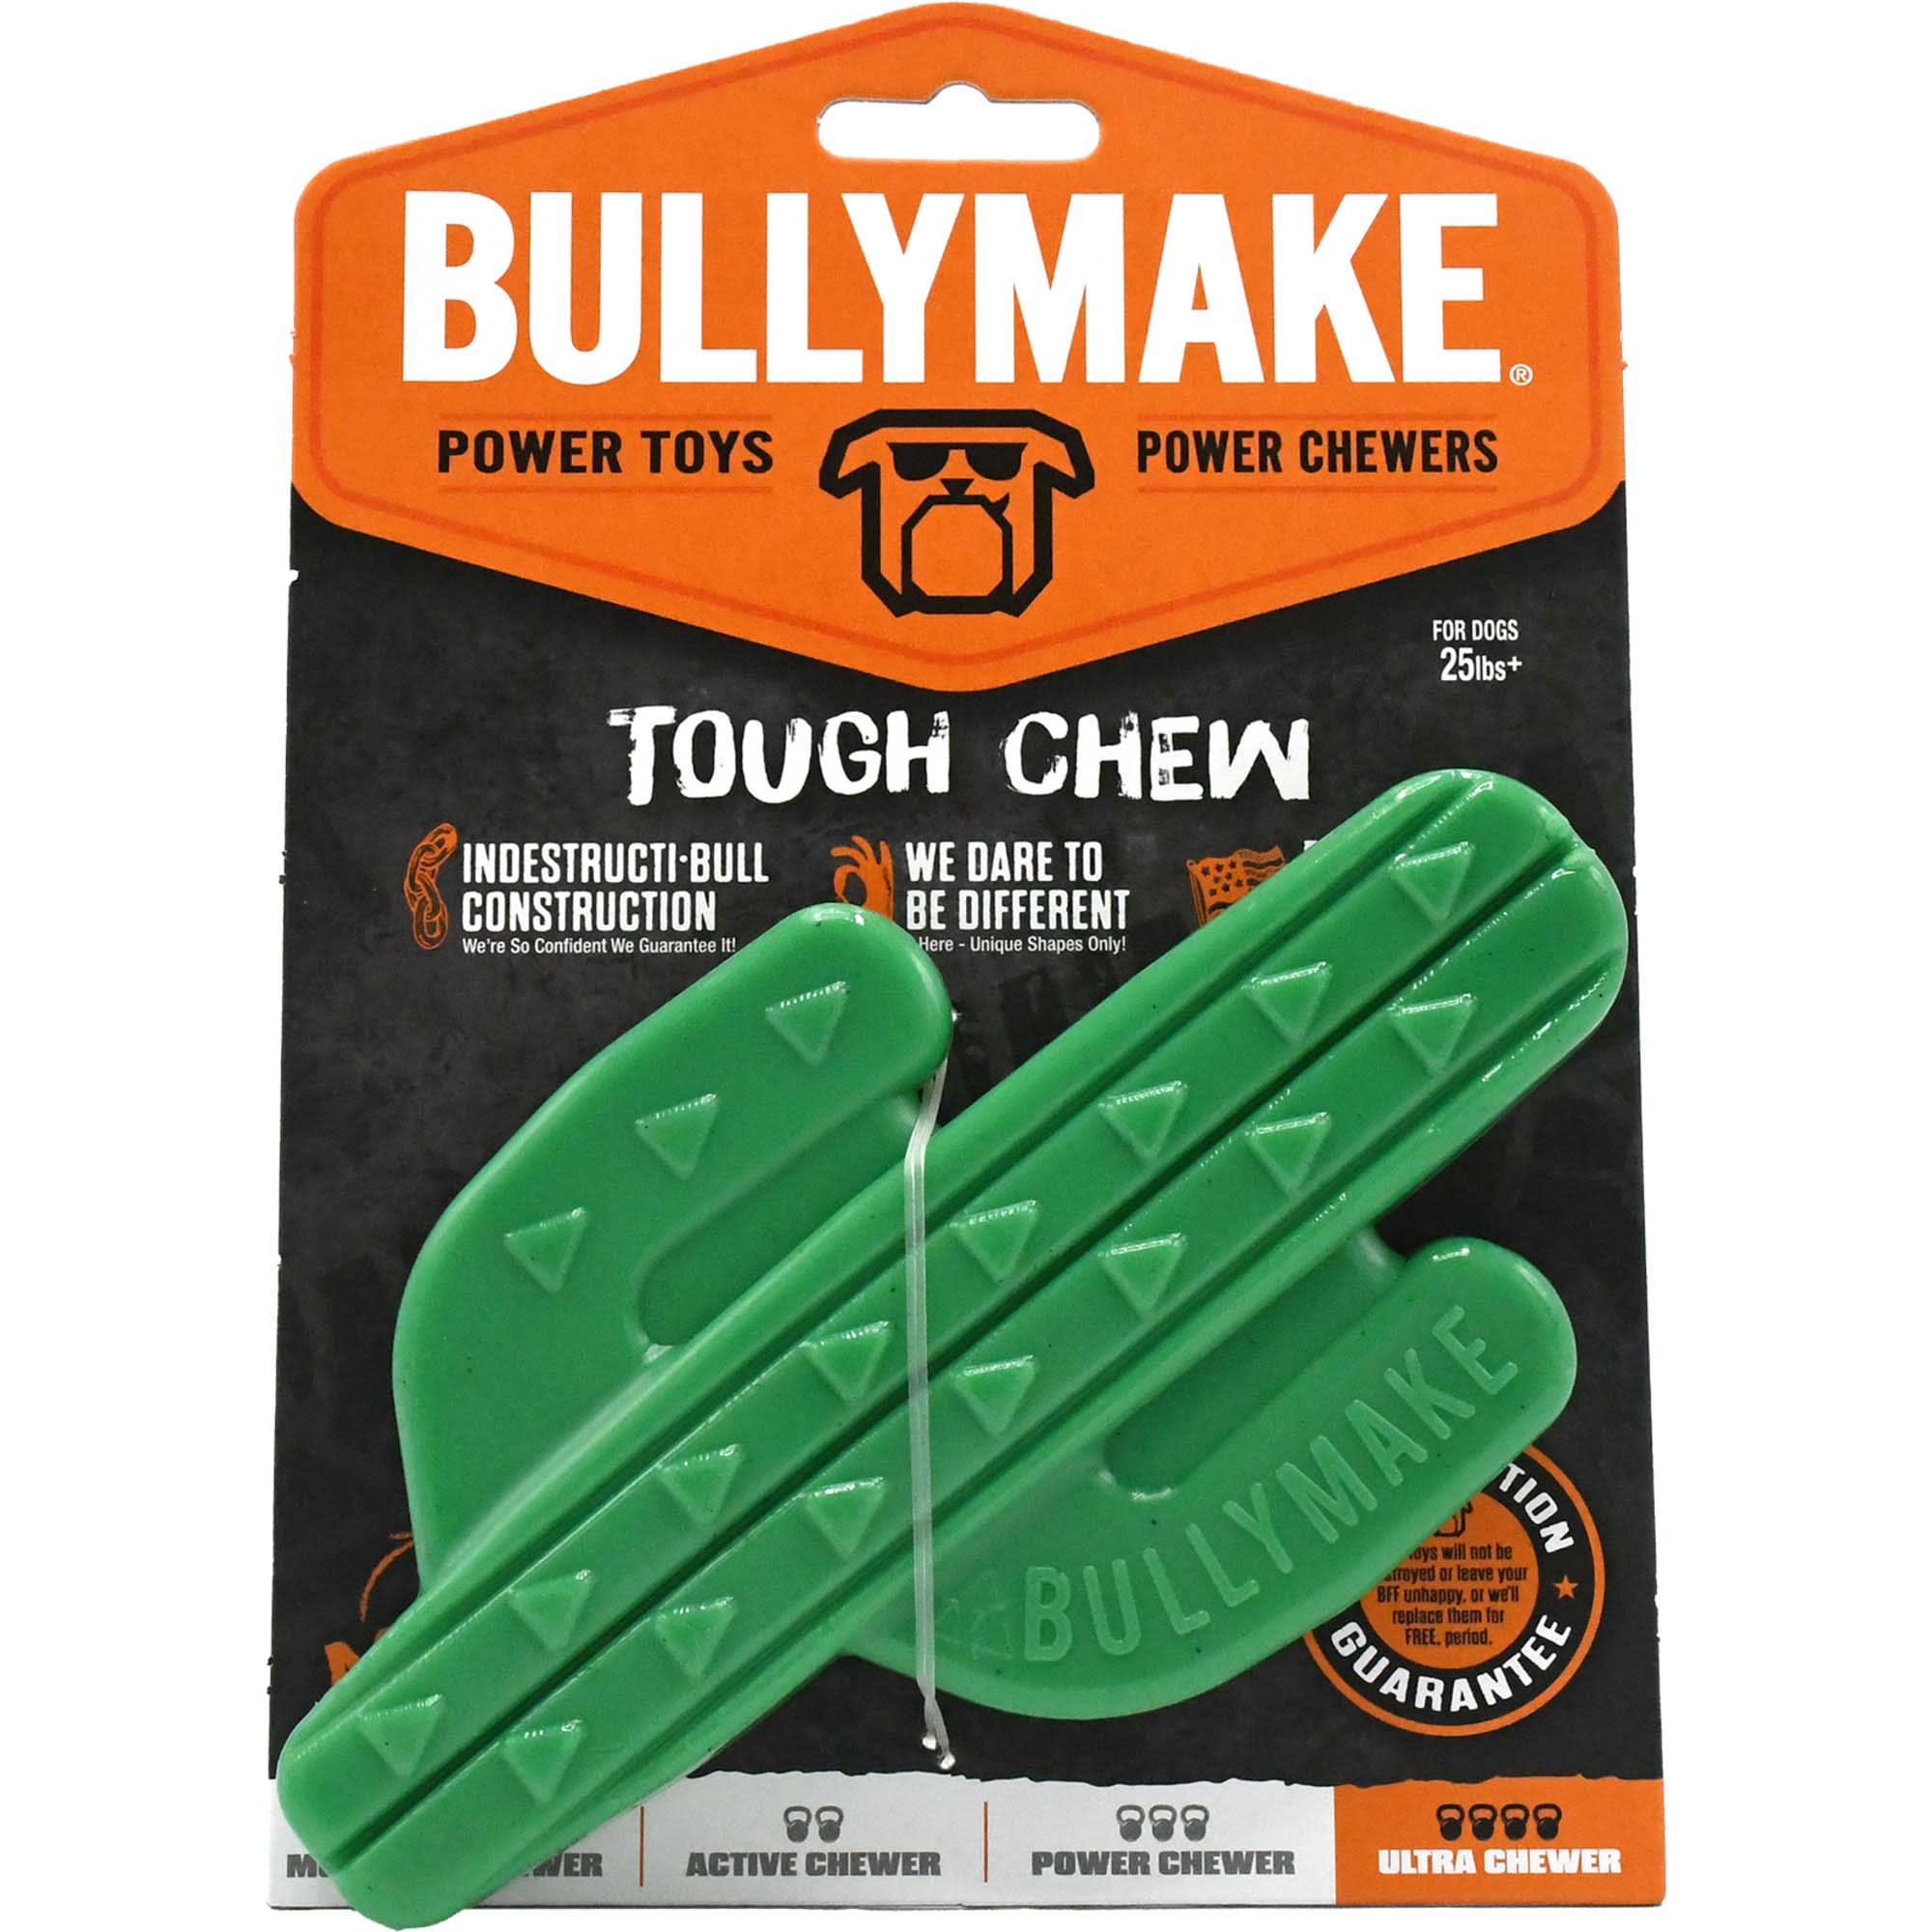 Bullymake Super Durable Dog Toys & Nutritious Treats ~ Giveaway US